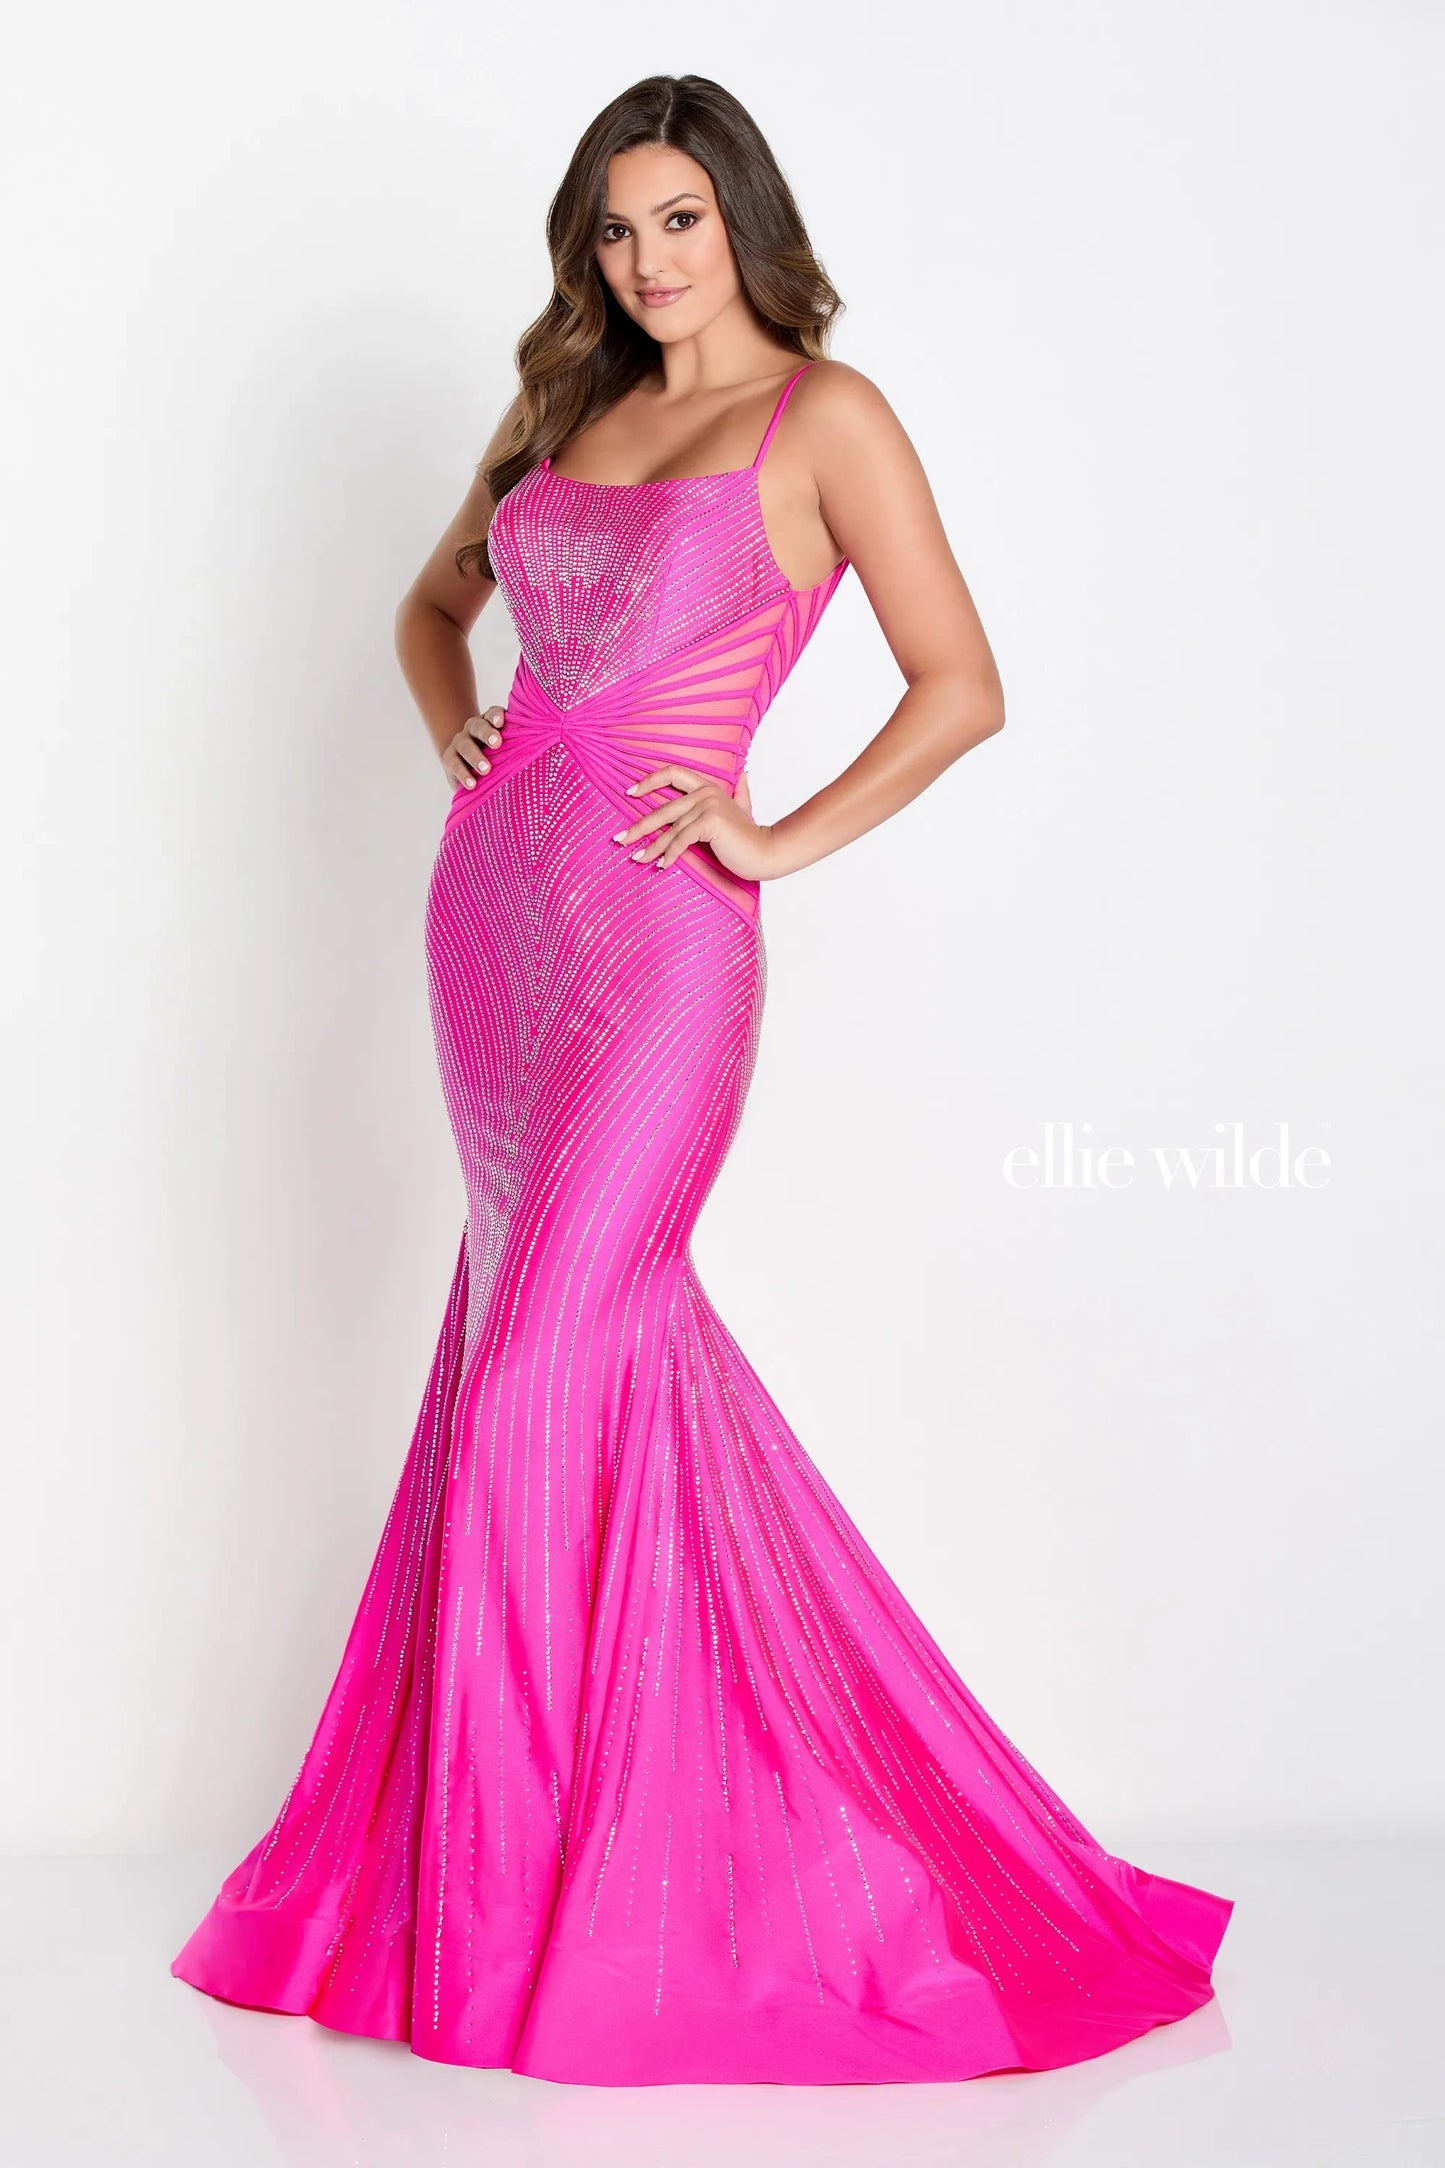 Prom Dresses Long Mermaid Formal Evening Beaded Prom Gown Hot Pink/Silver